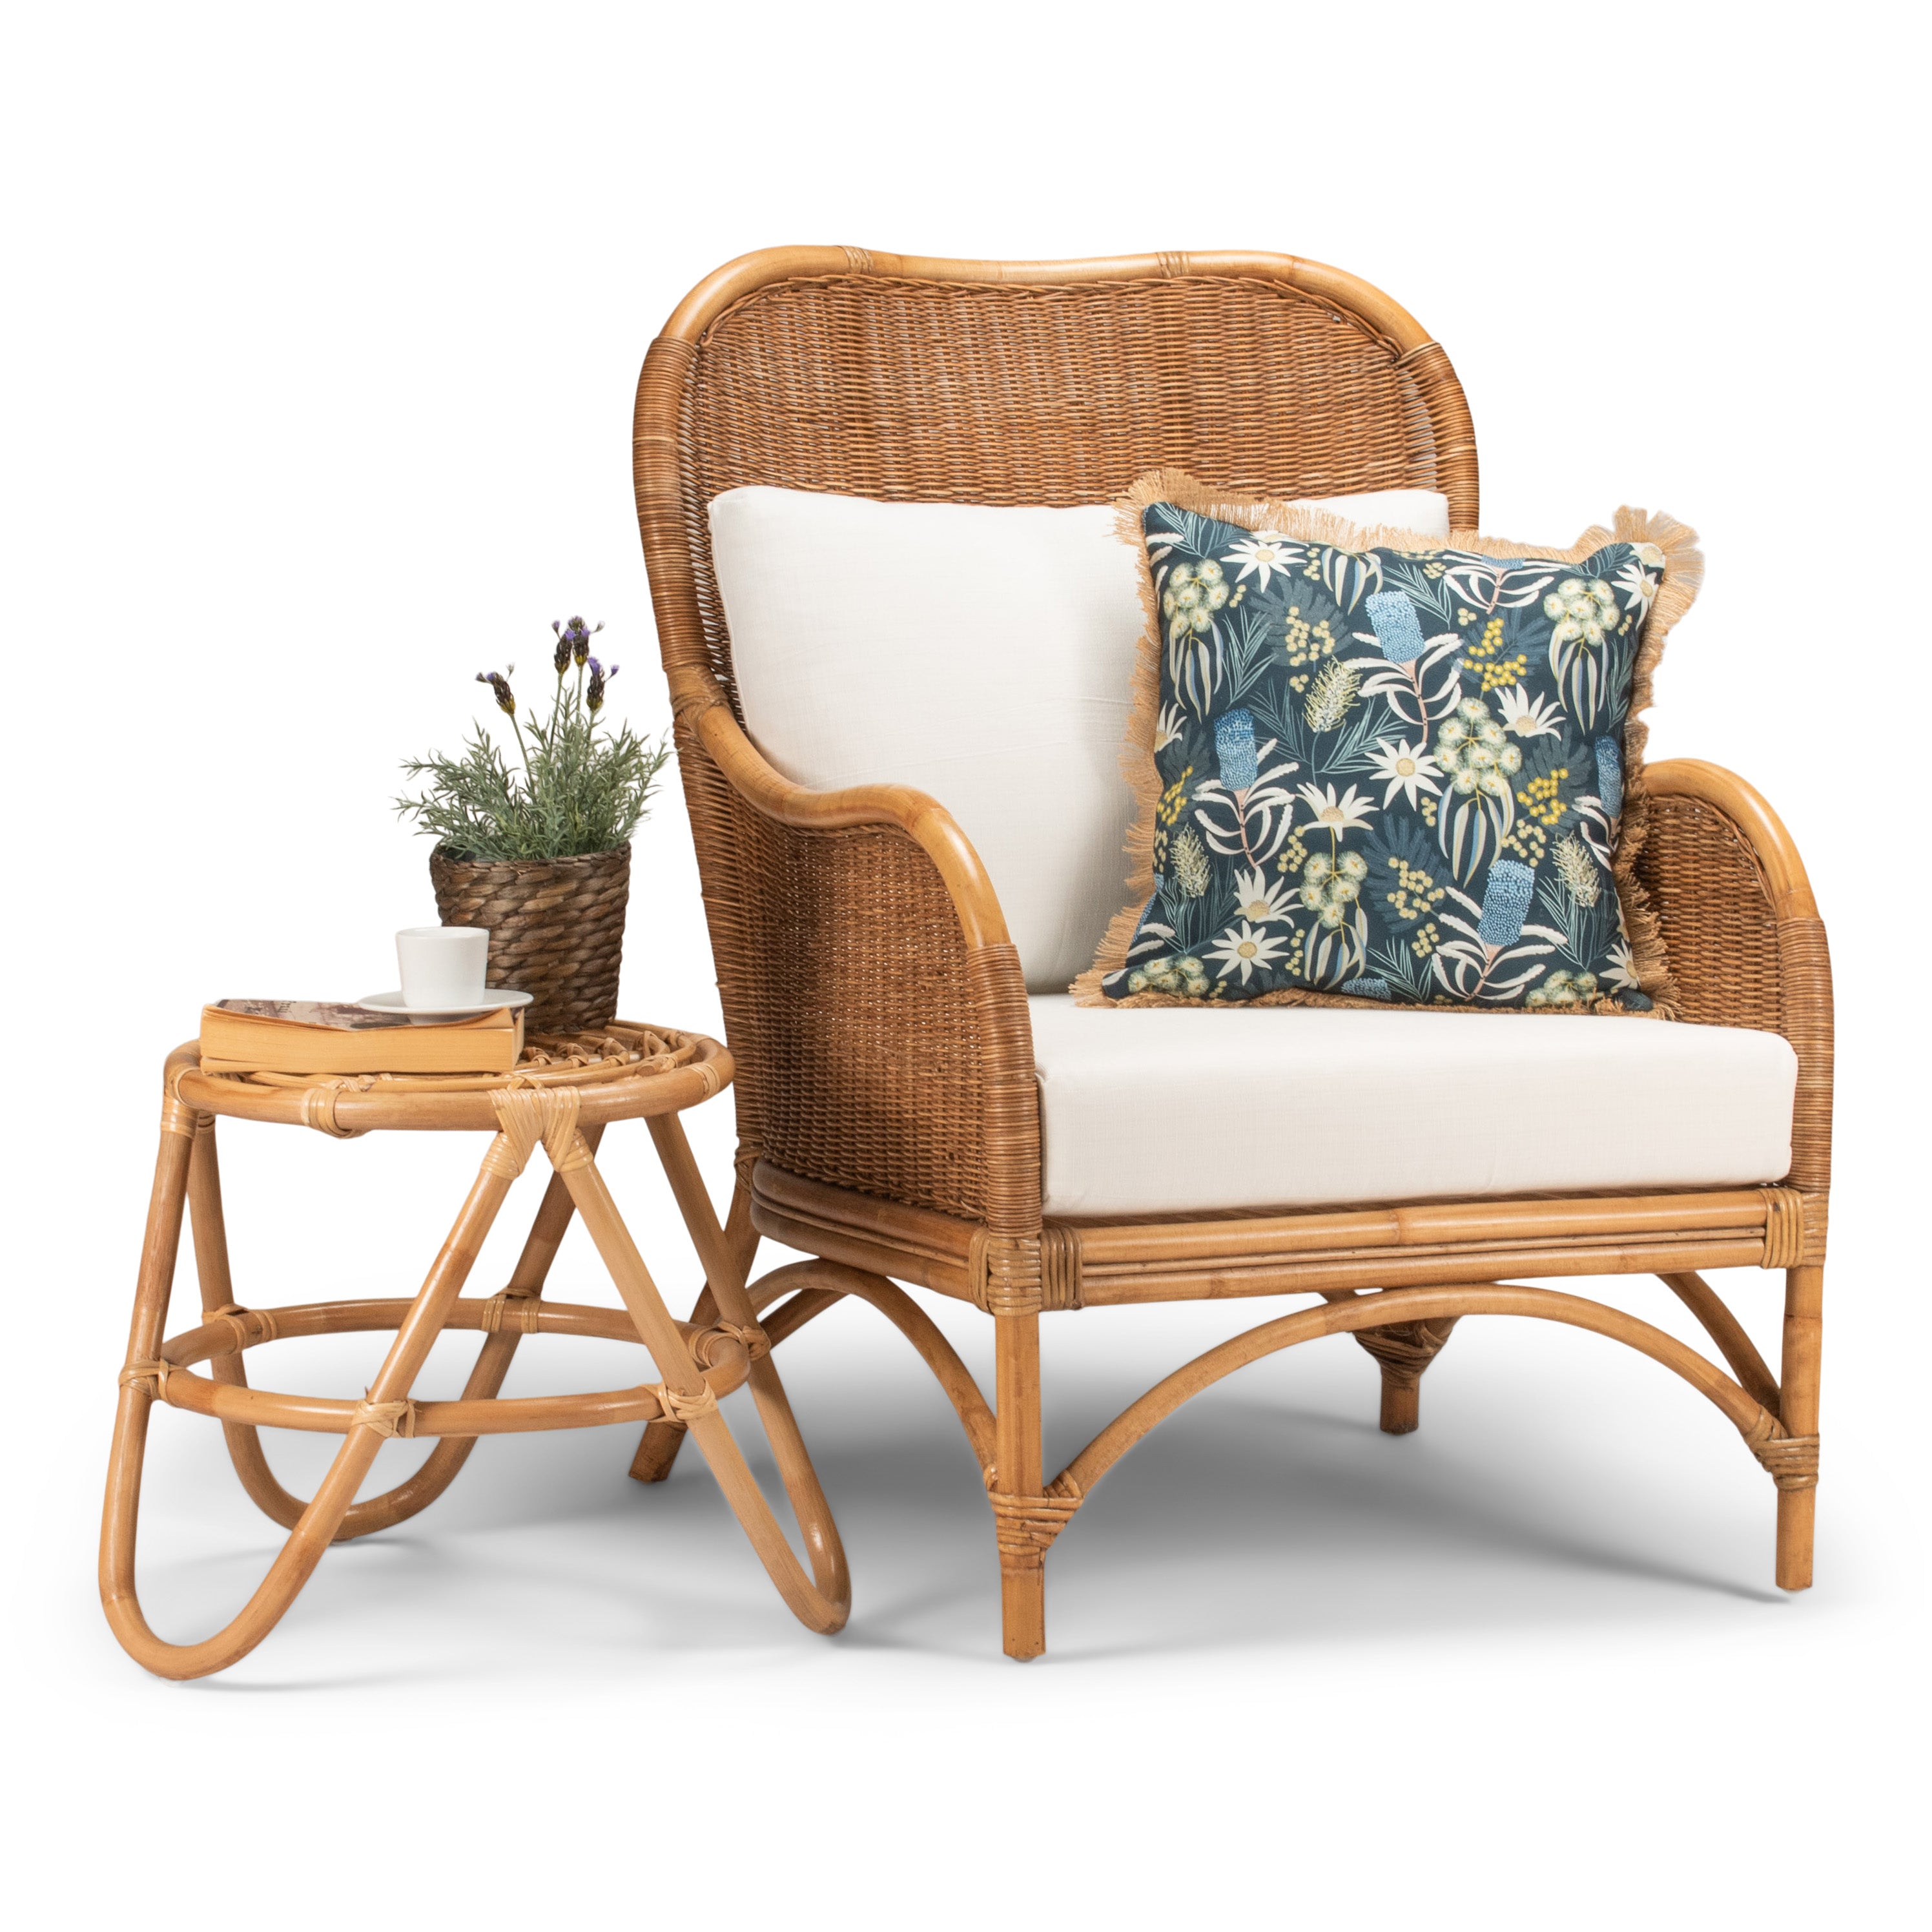 Newhaven Chairs & Side Table Bundle